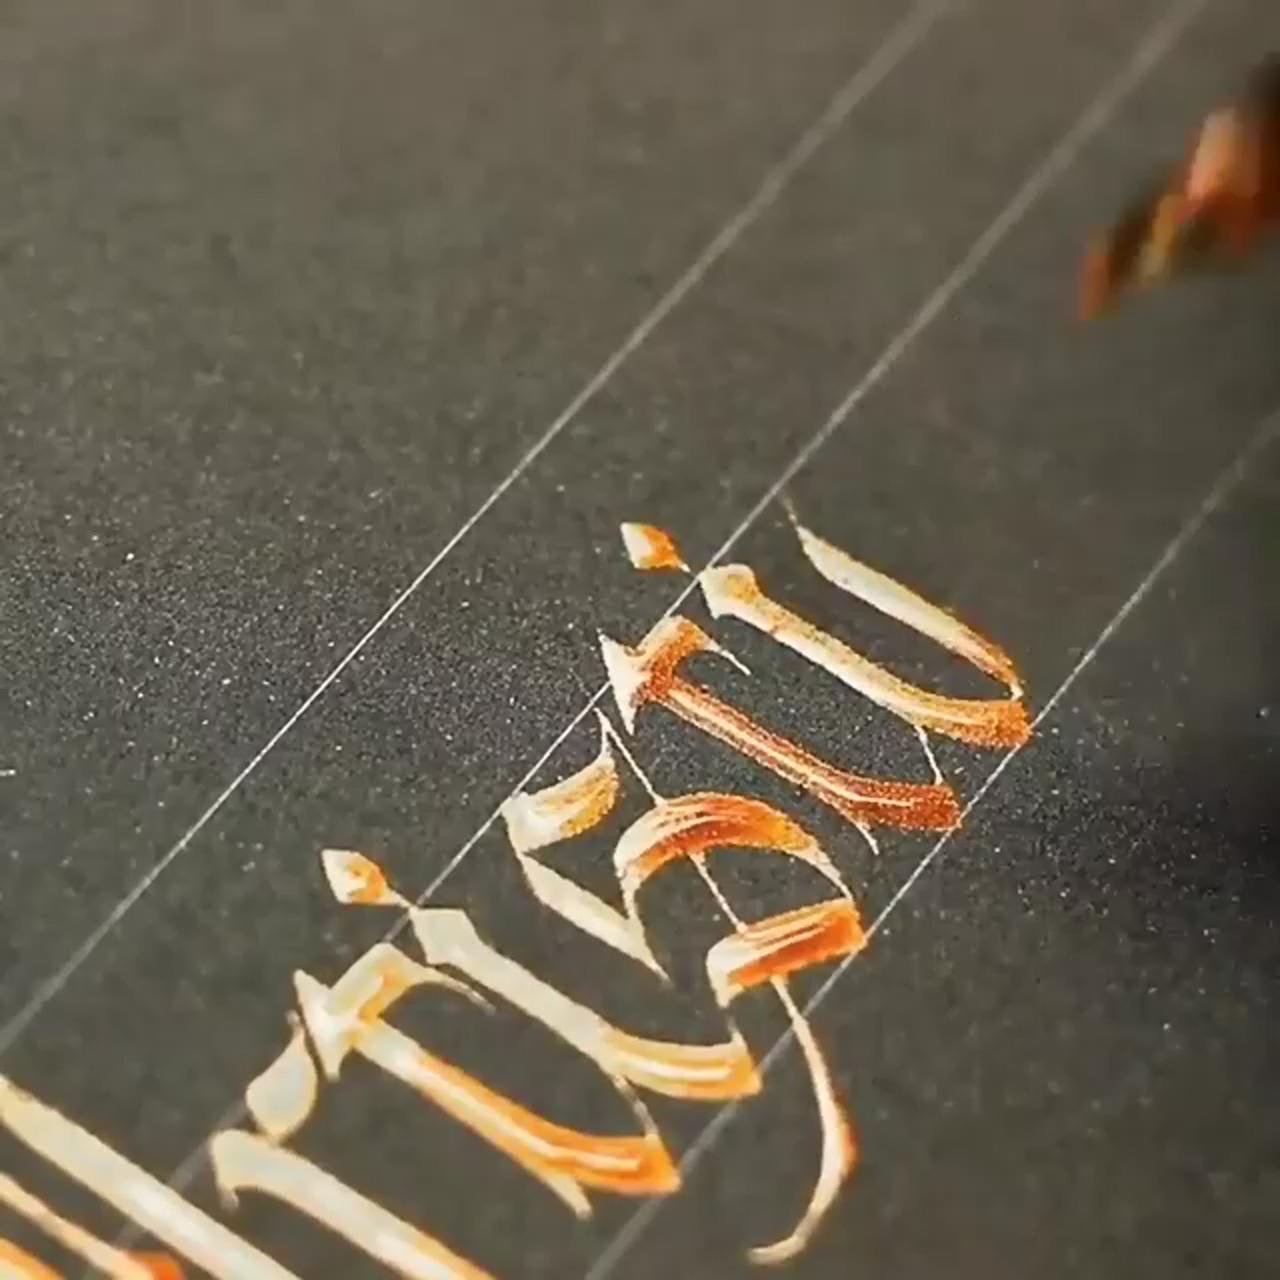 Calligraphy lessons | calligraphy video